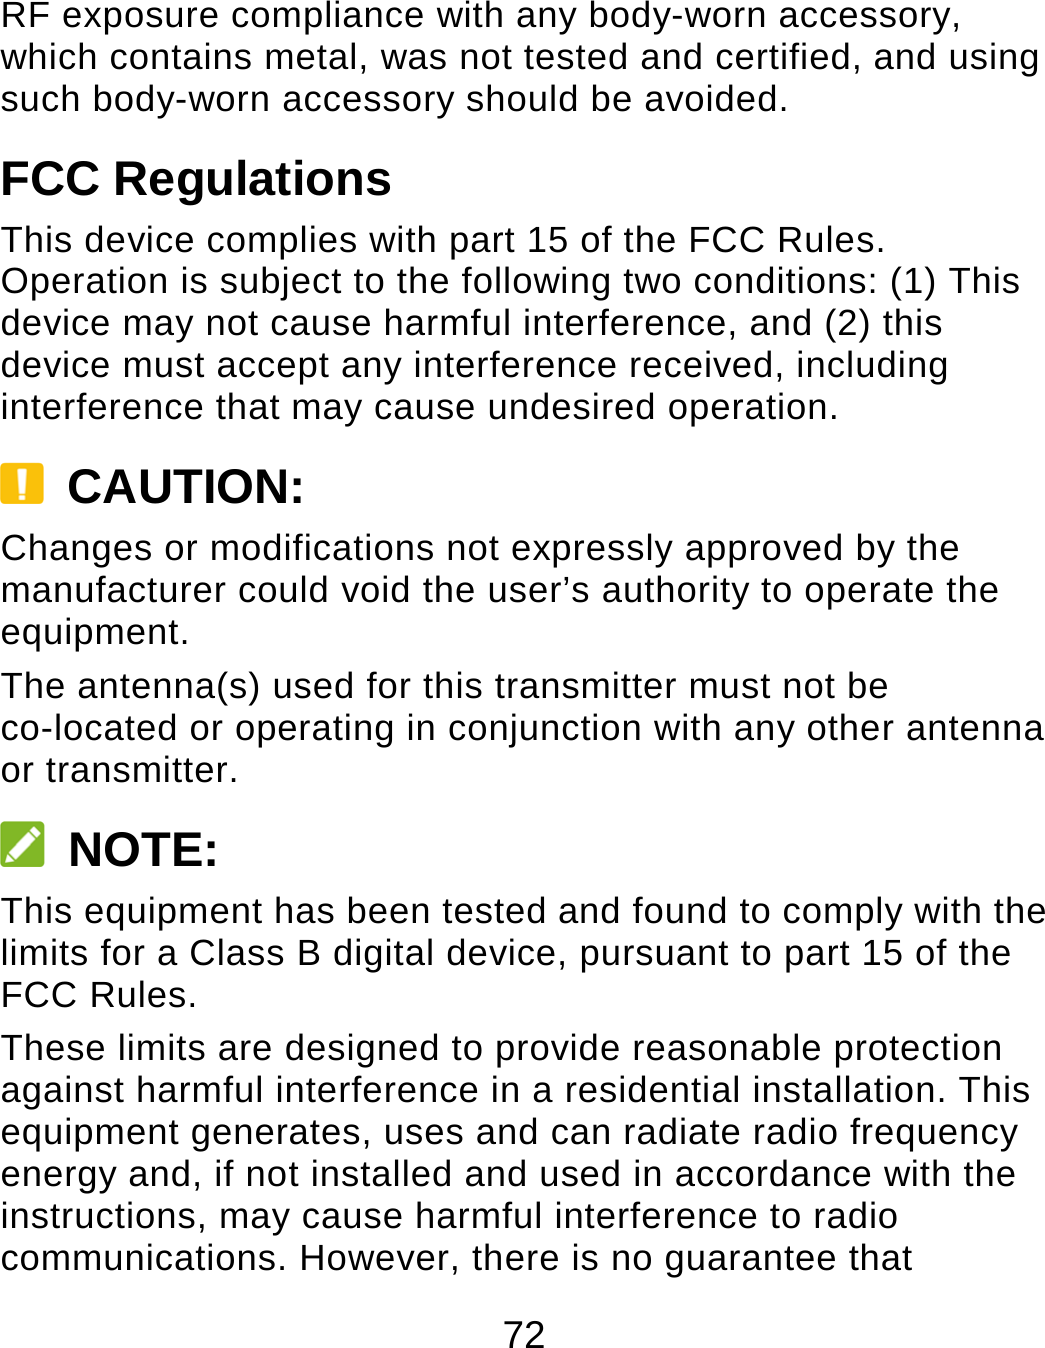 72 RF exposure compliance with any body-worn accessory, which contains metal, was not tested and certified, and using such body-worn accessory should be avoided. FCC Regulations This device complies with part 15 of the FCC Rules. Operation is subject to the following two conditions: (1) This device may not cause harmful interference, and (2) this device must accept any interference received, including interference that may cause undesired operation.  CAUTION: Changes or modifications not expressly approved by the manufacturer could void the user’s authority to operate the equipment. The antenna(s) used for this transmitter must not be co-located or operating in conjunction with any other antenna or transmitter.  NOTE: This equipment has been tested and found to comply with the limits for a Class B digital device, pursuant to part 15 of the FCC Rules.   These limits are designed to provide reasonable protection against harmful interference in a residential installation. This equipment generates, uses and can radiate radio frequency energy and, if not installed and used in accordance with the instructions, may cause harmful interference to radio communications. However, there is no guarantee that 